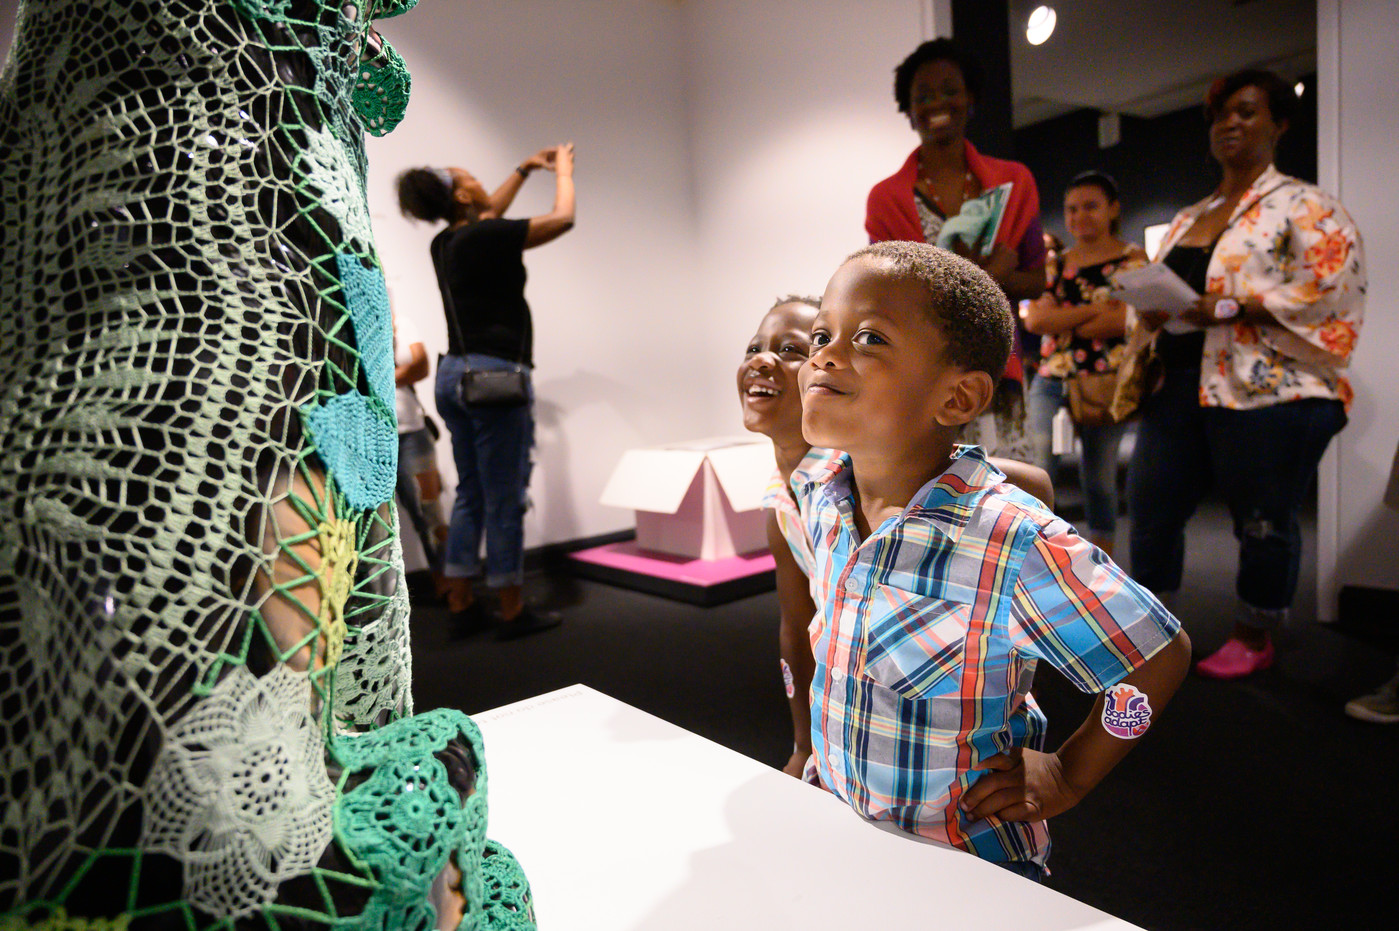 Two young children with medium skin tone stand in front of a dog sculpture covered with green crochet panels. One child stands with hands on hips, eyes turned to look directly at the viewer, and gives a slight smirk. Adult visitors in the background look at the scene with amusement.